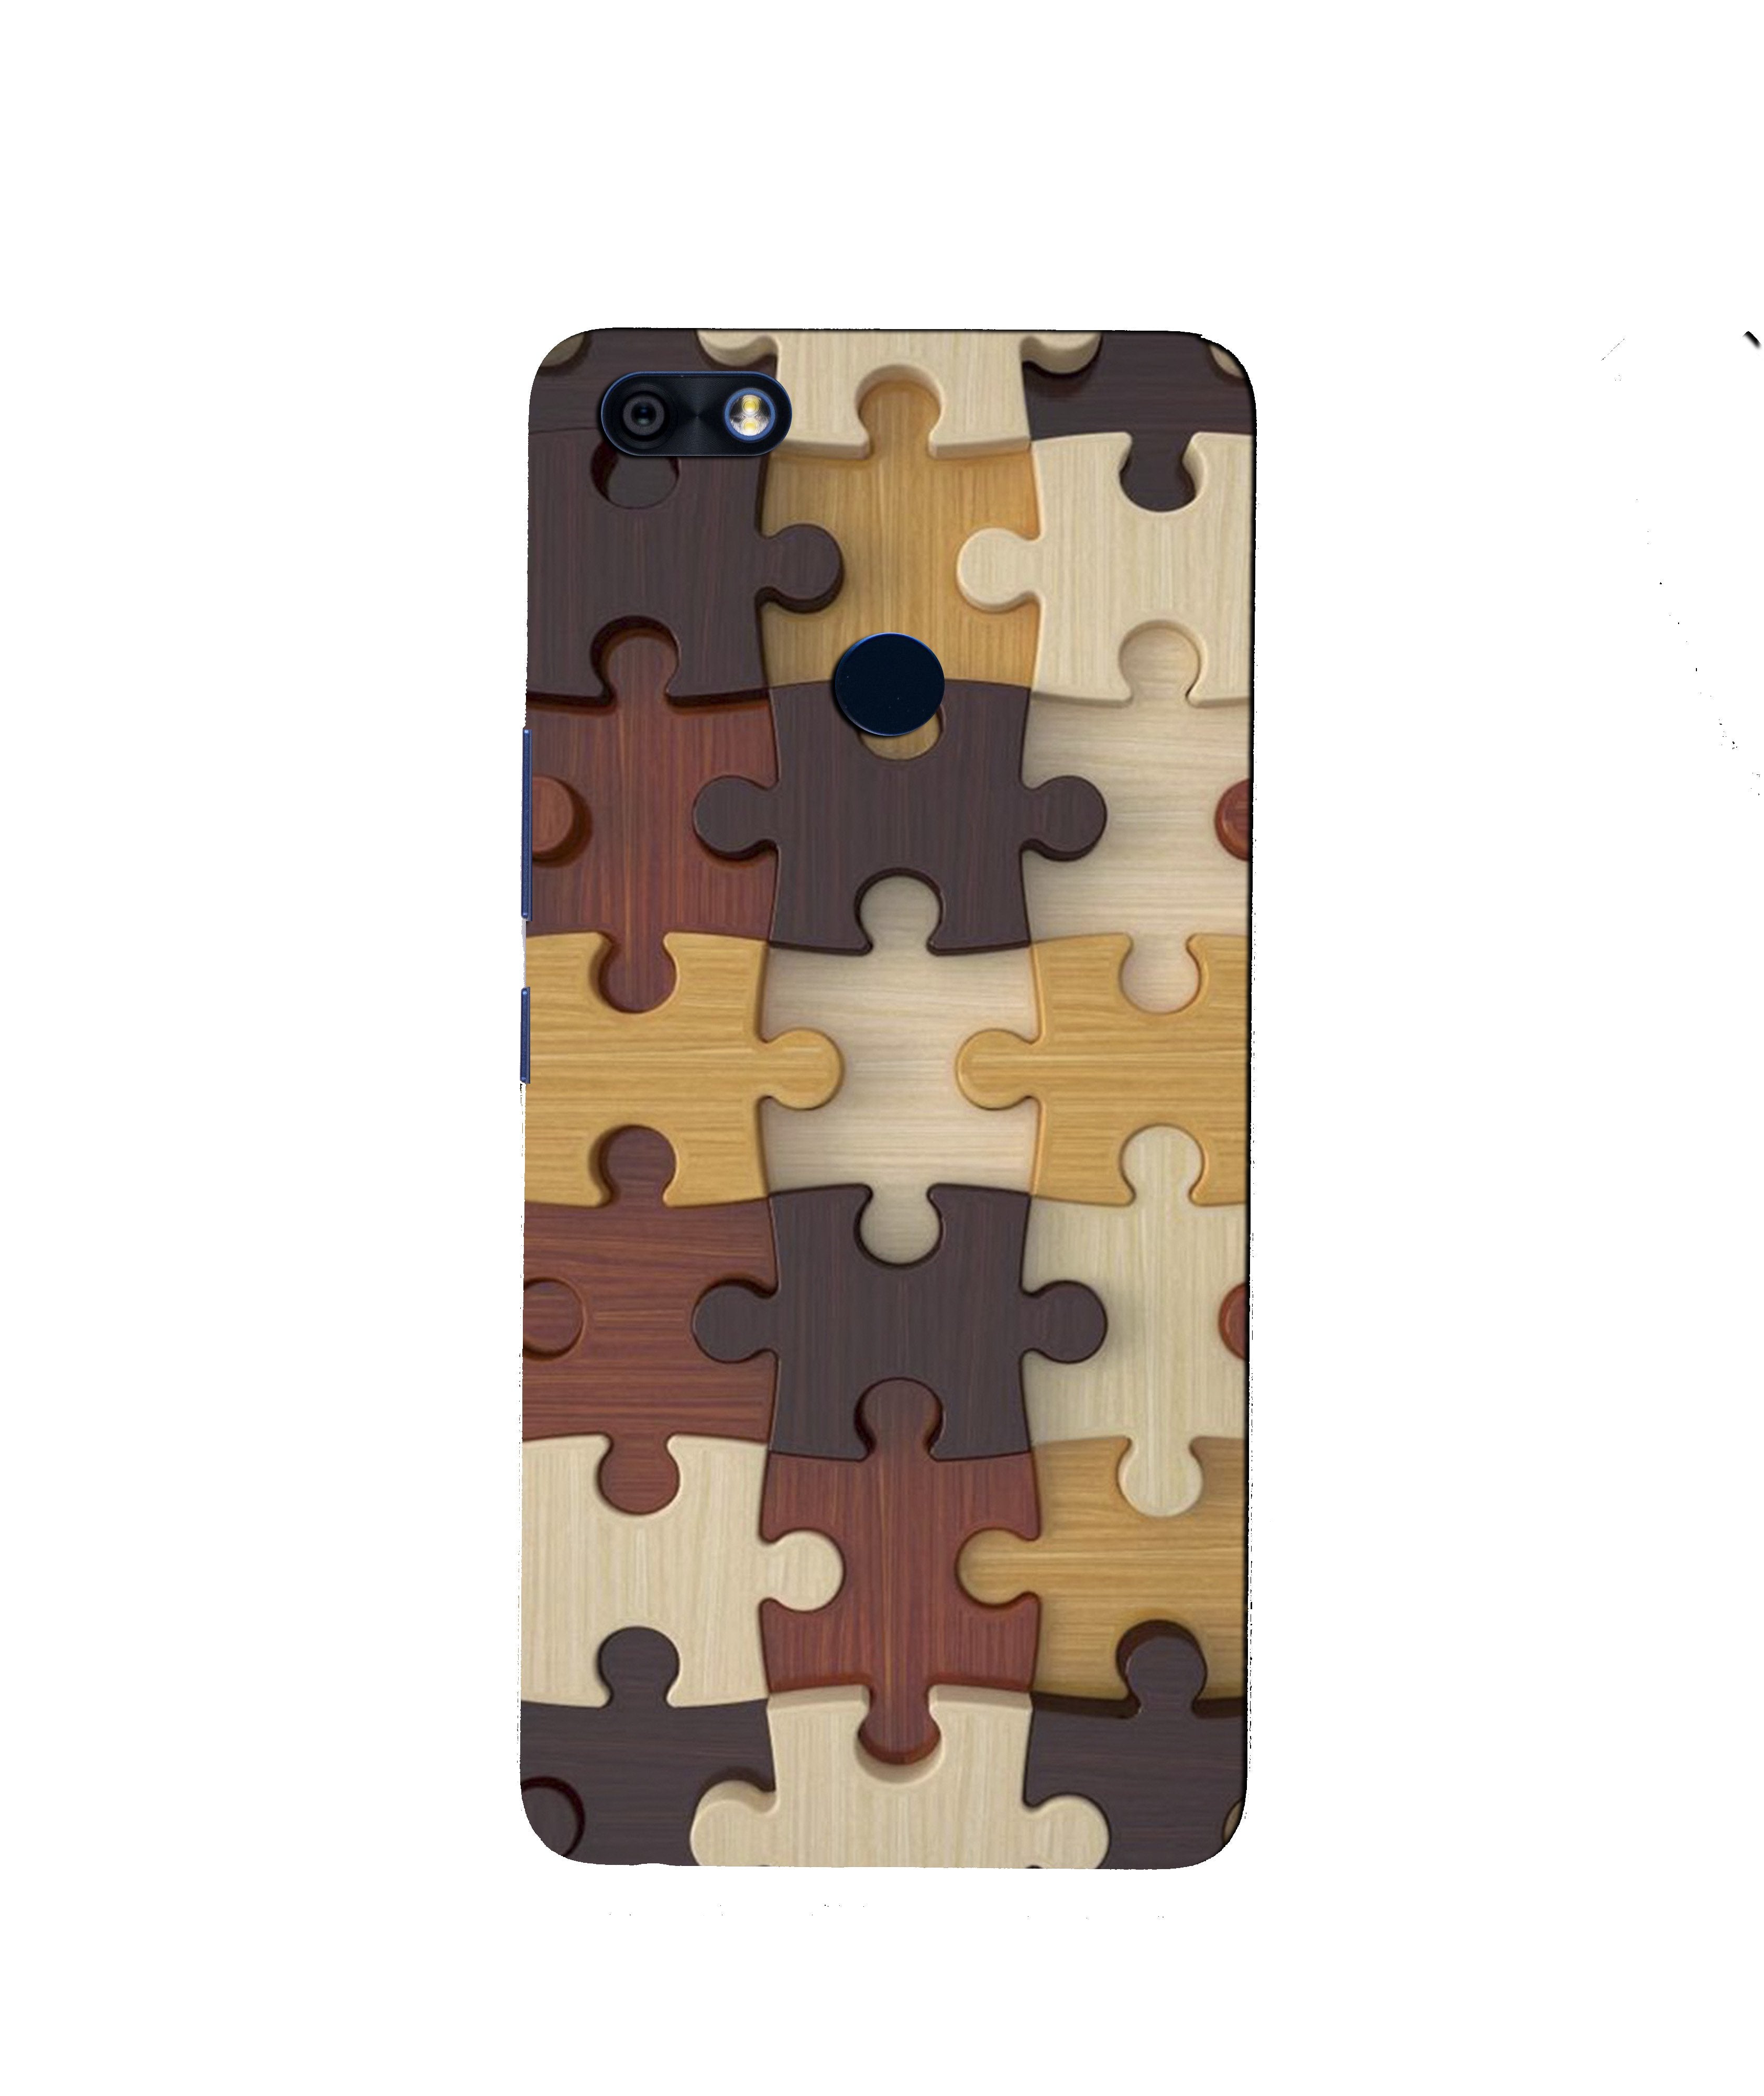 Puzzle Pattern Case for Infinix Note 5 / Note 5 Pro (Design No. 217)